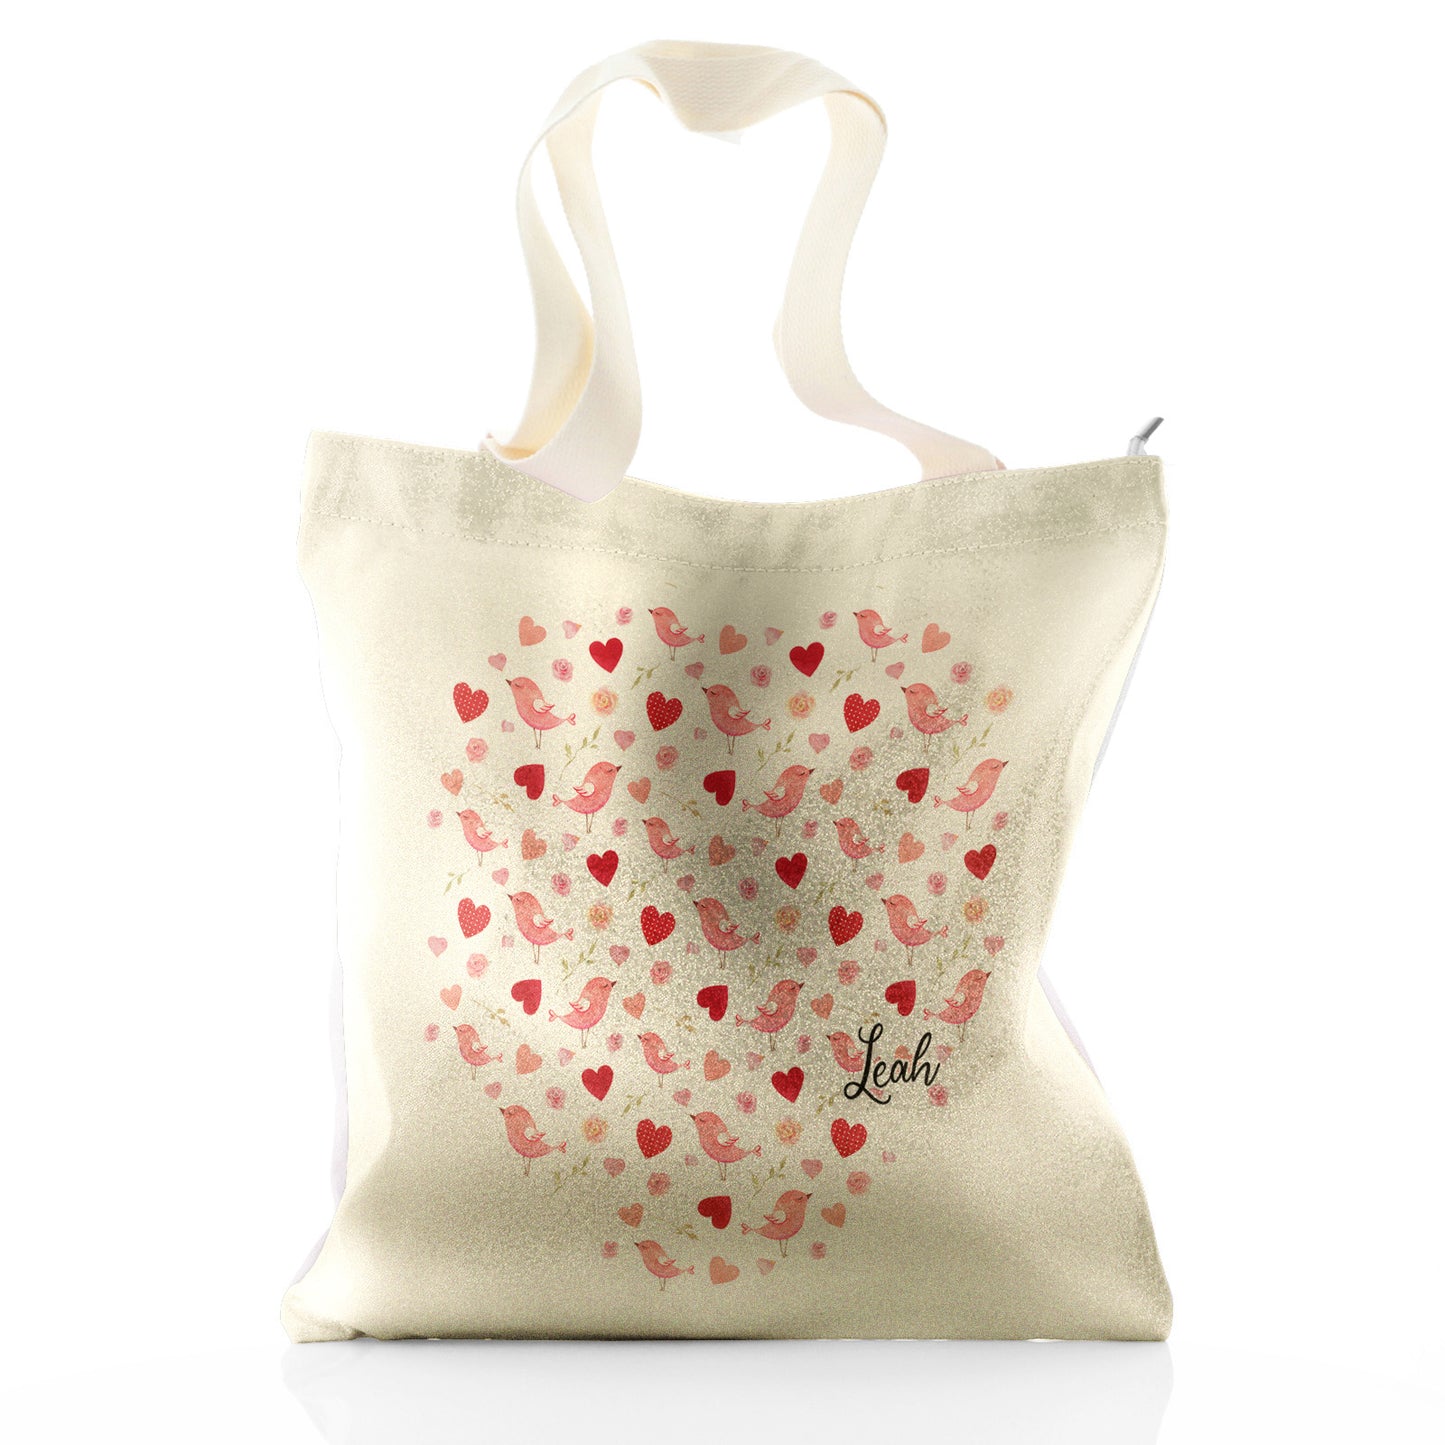 Personalised Glitter Tote Bag with Stylish Text and Love Heart Birds Print